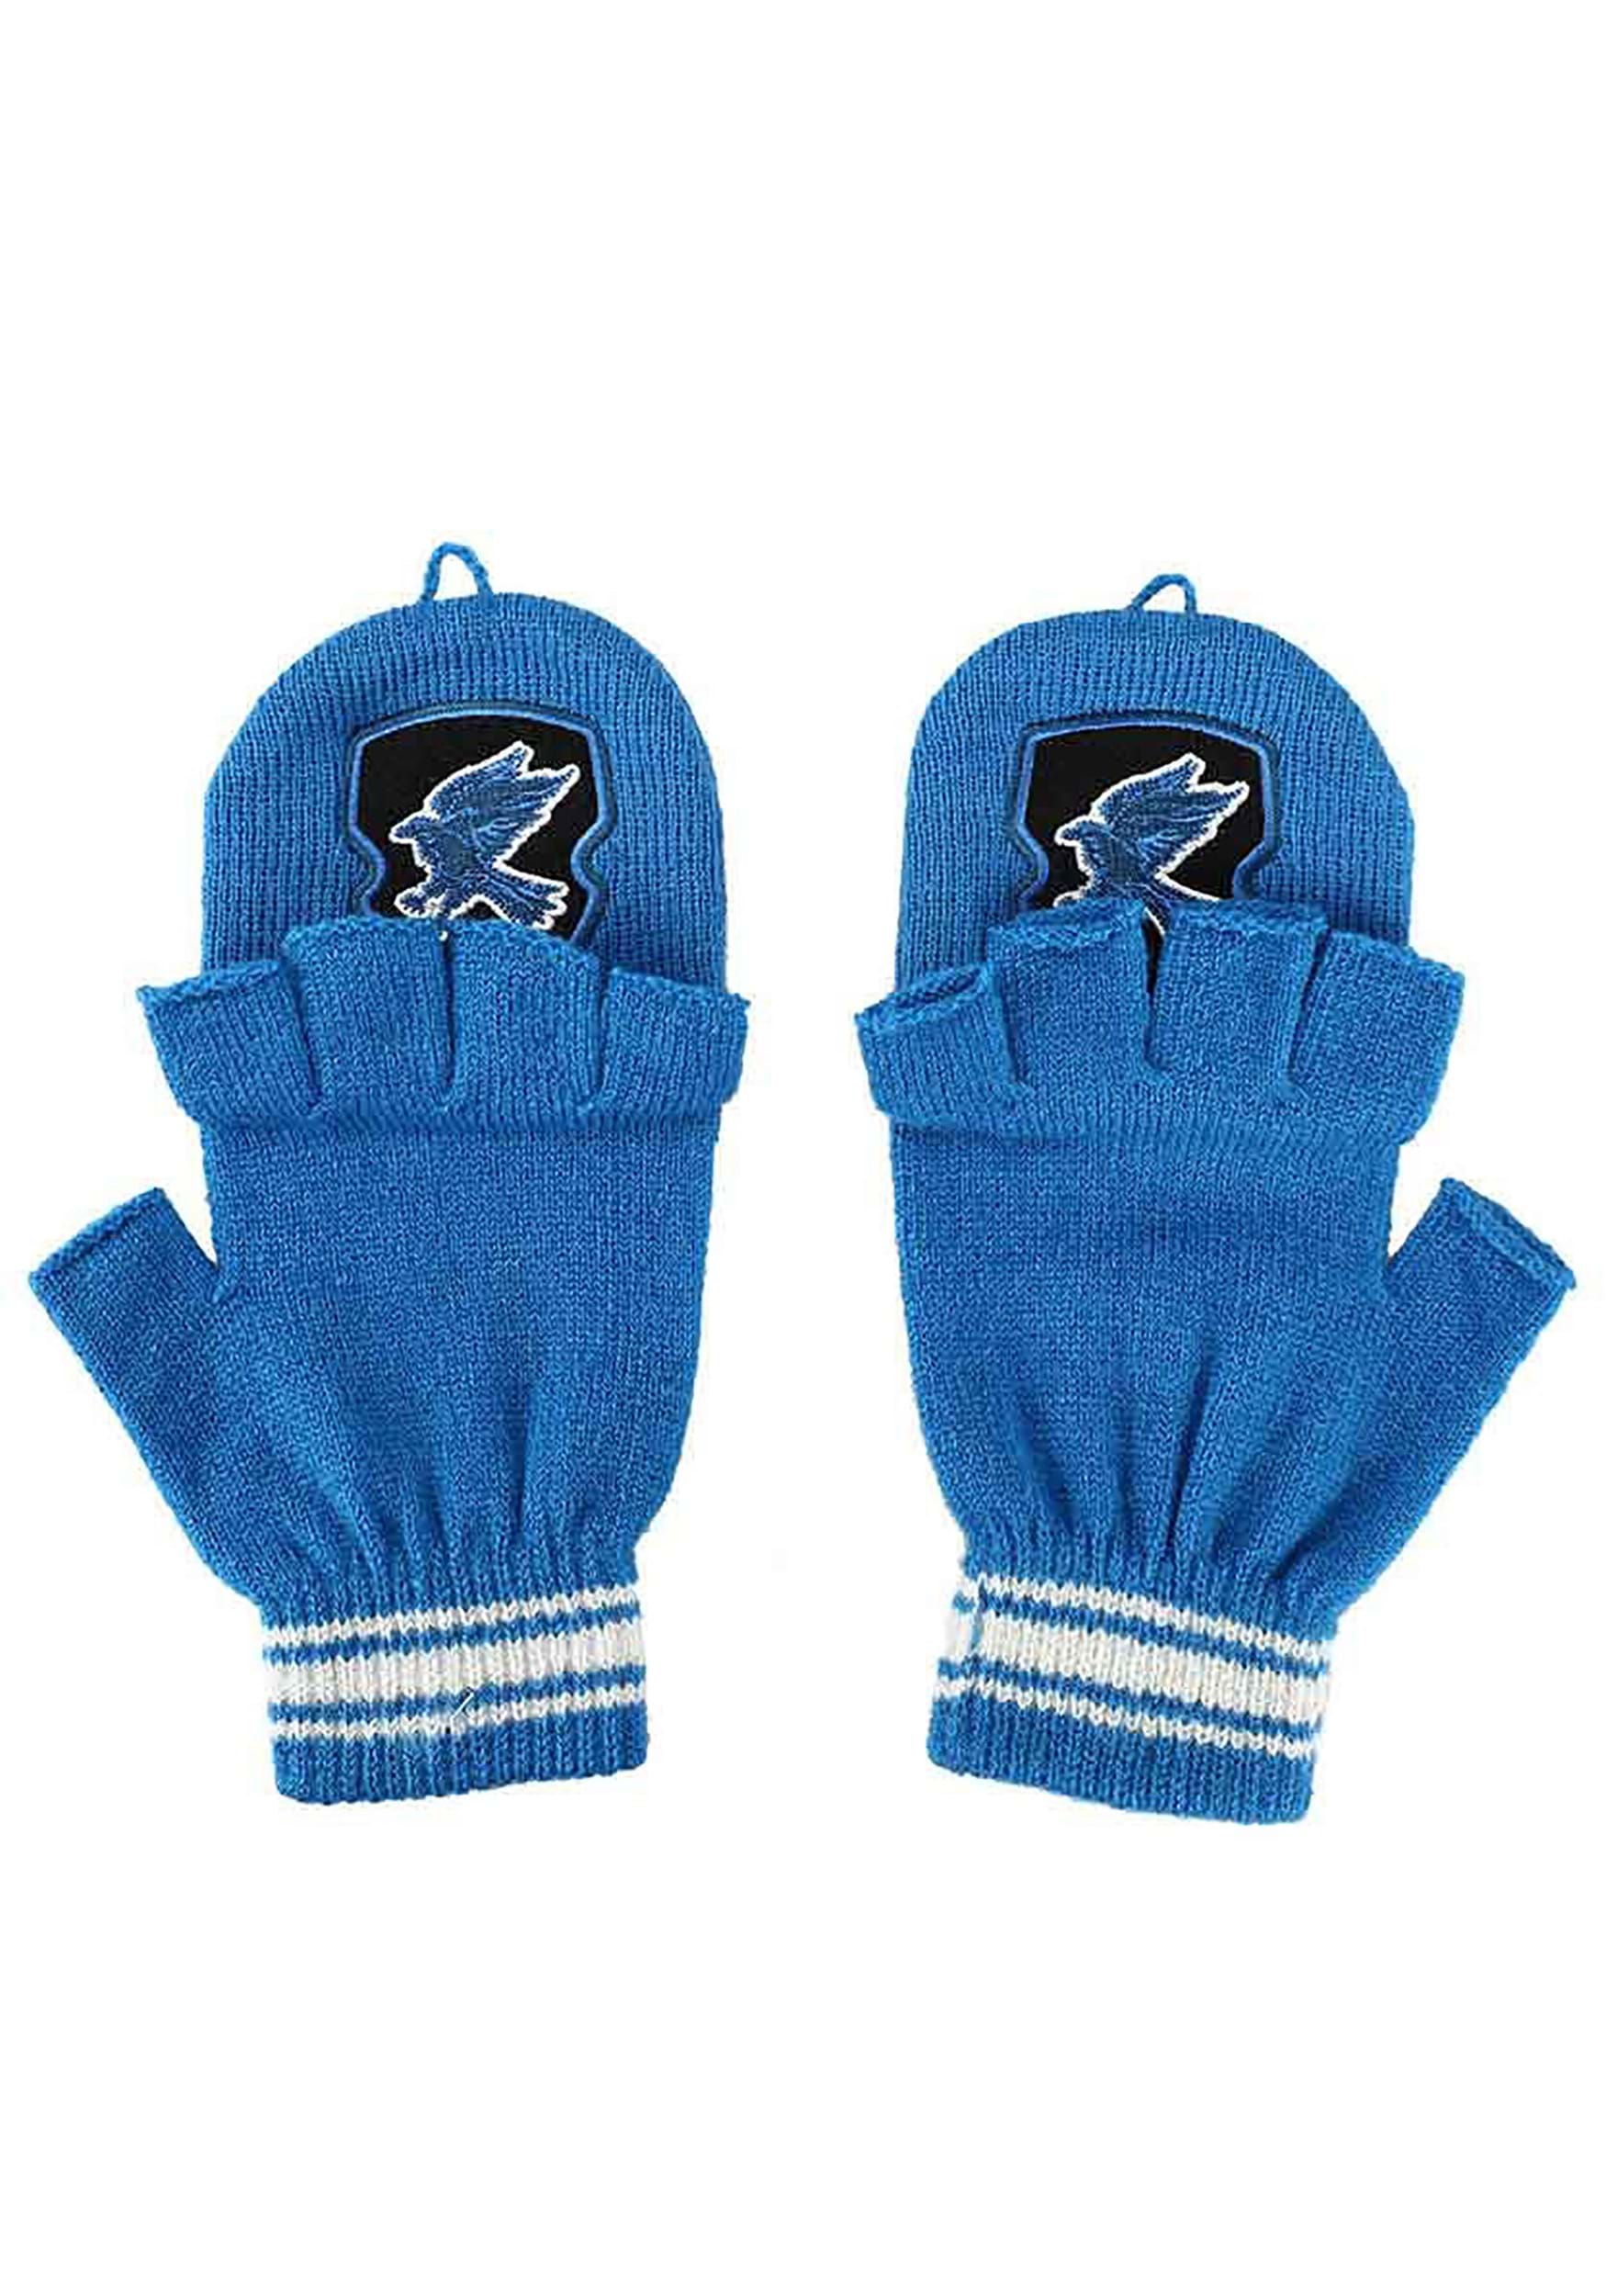 Ravenclaw Harry Potter Beanie & Fingerless Gloves With Mitten Flap Set